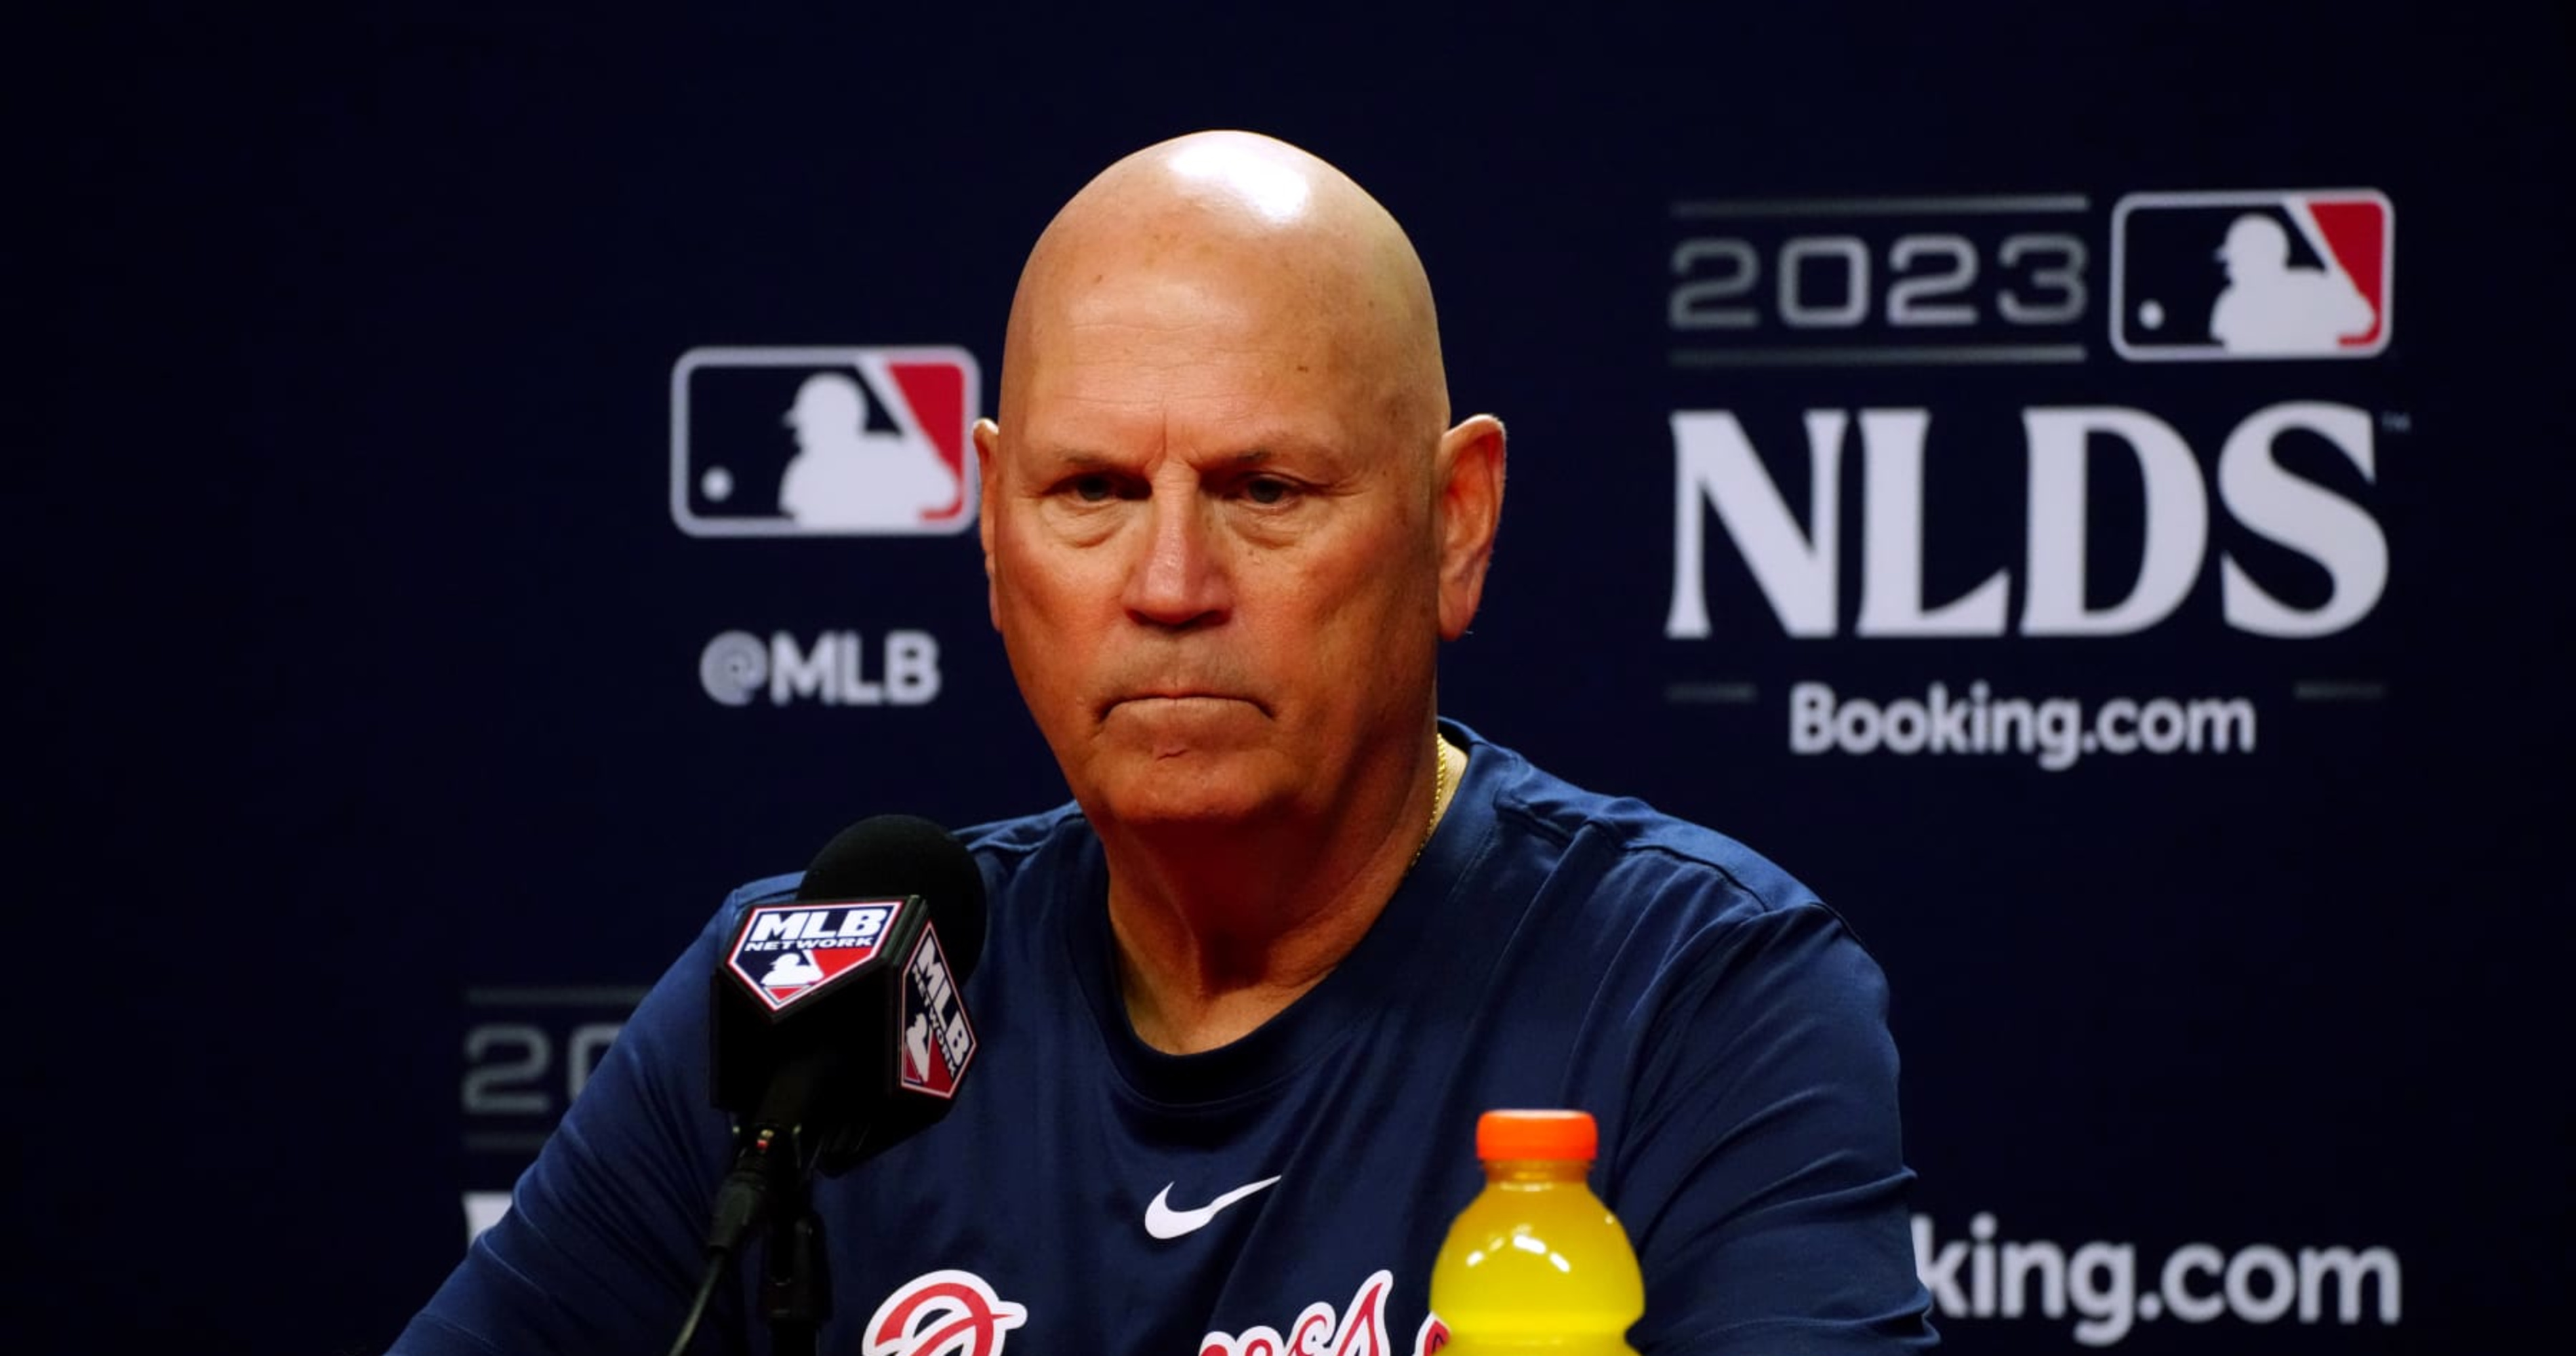 Braves' Brian Snitker Calls Out Phillies Fans over Treatment of Family at Road Games